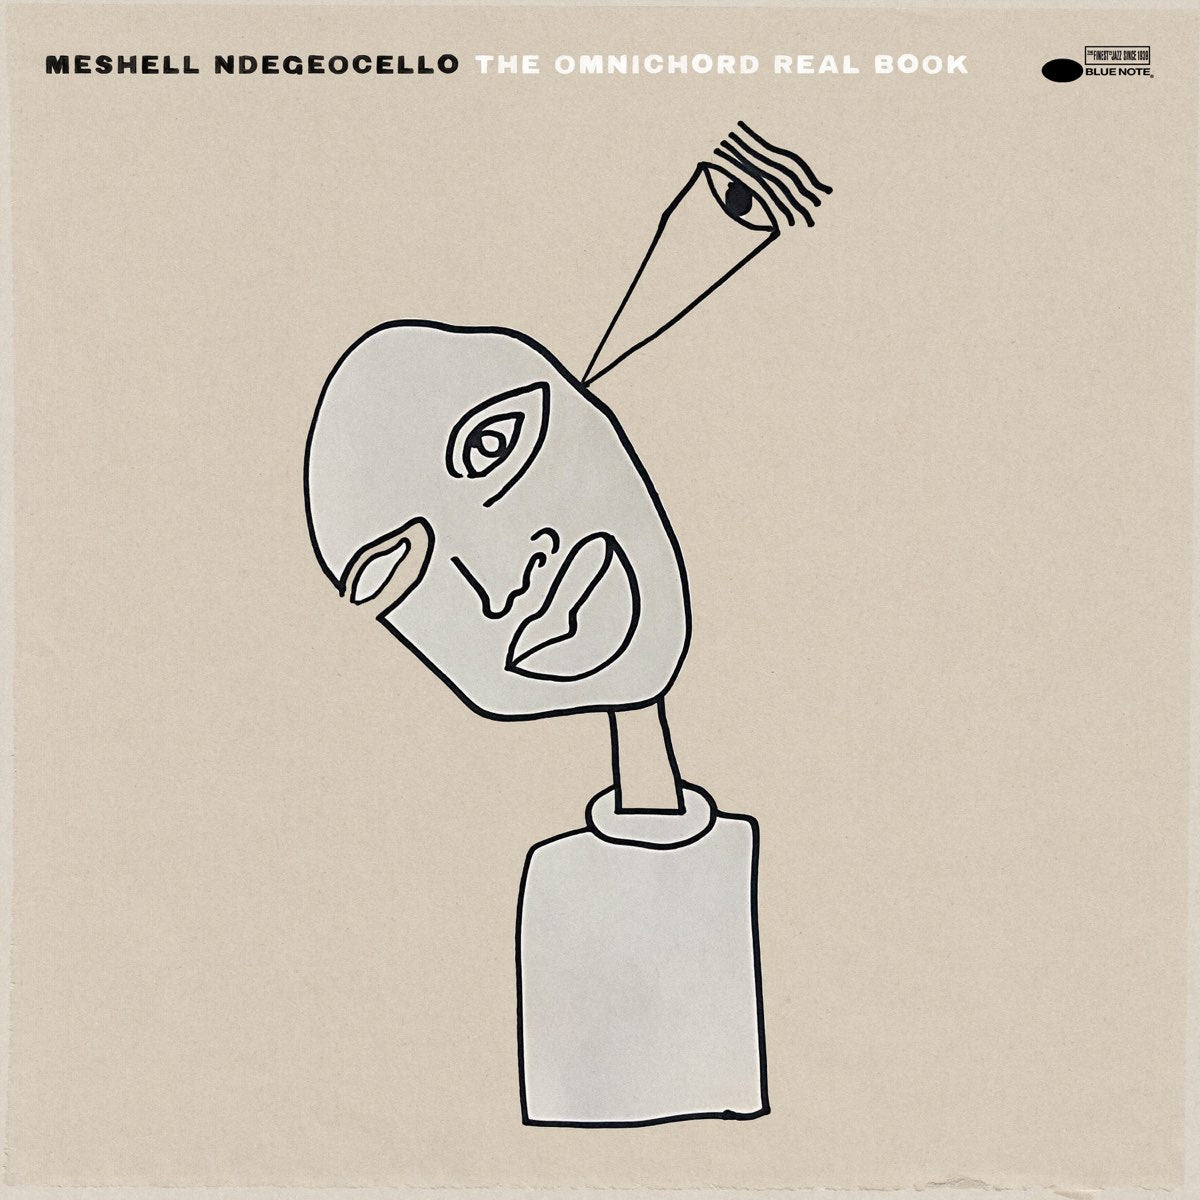 NdegeOcello, Meshell "The Omnichord Real Book" 2LP